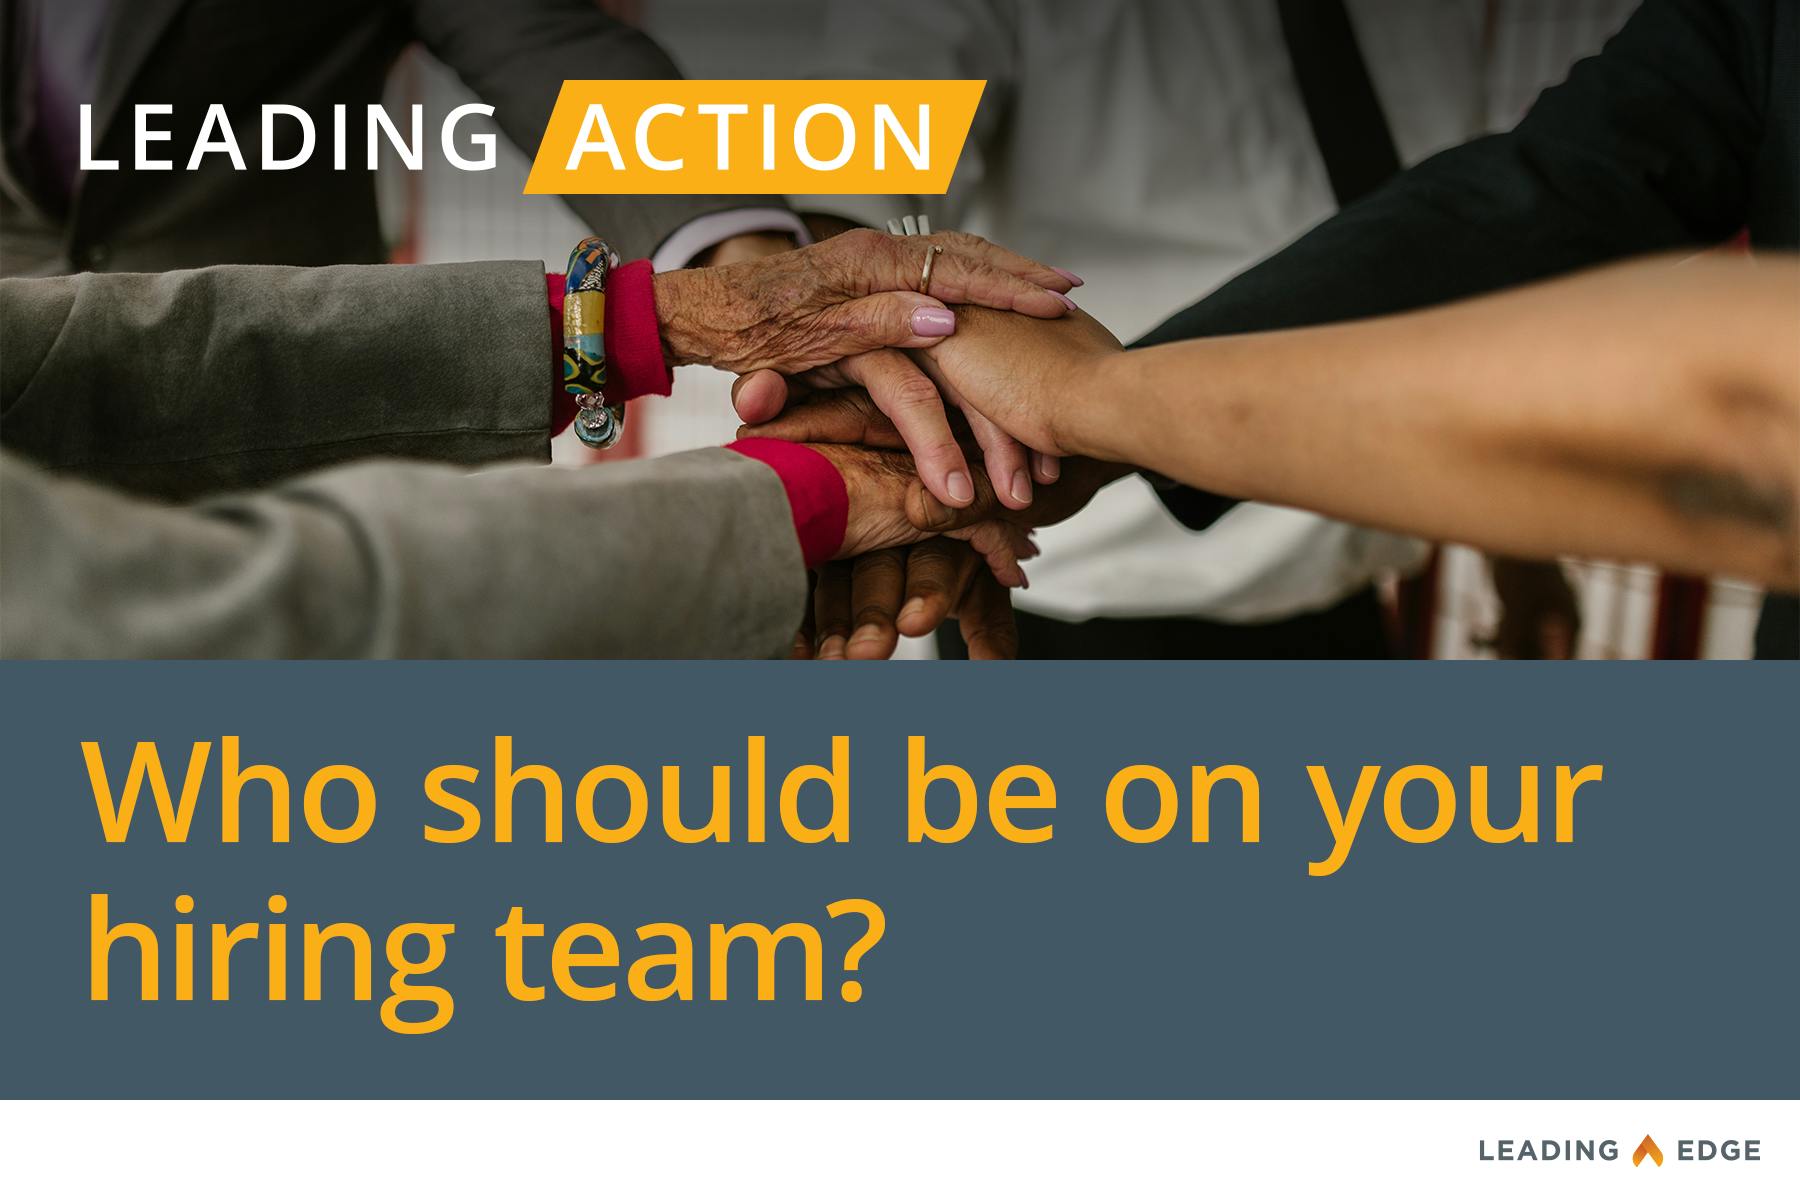 Leading Action: Who should be on your hiring team?